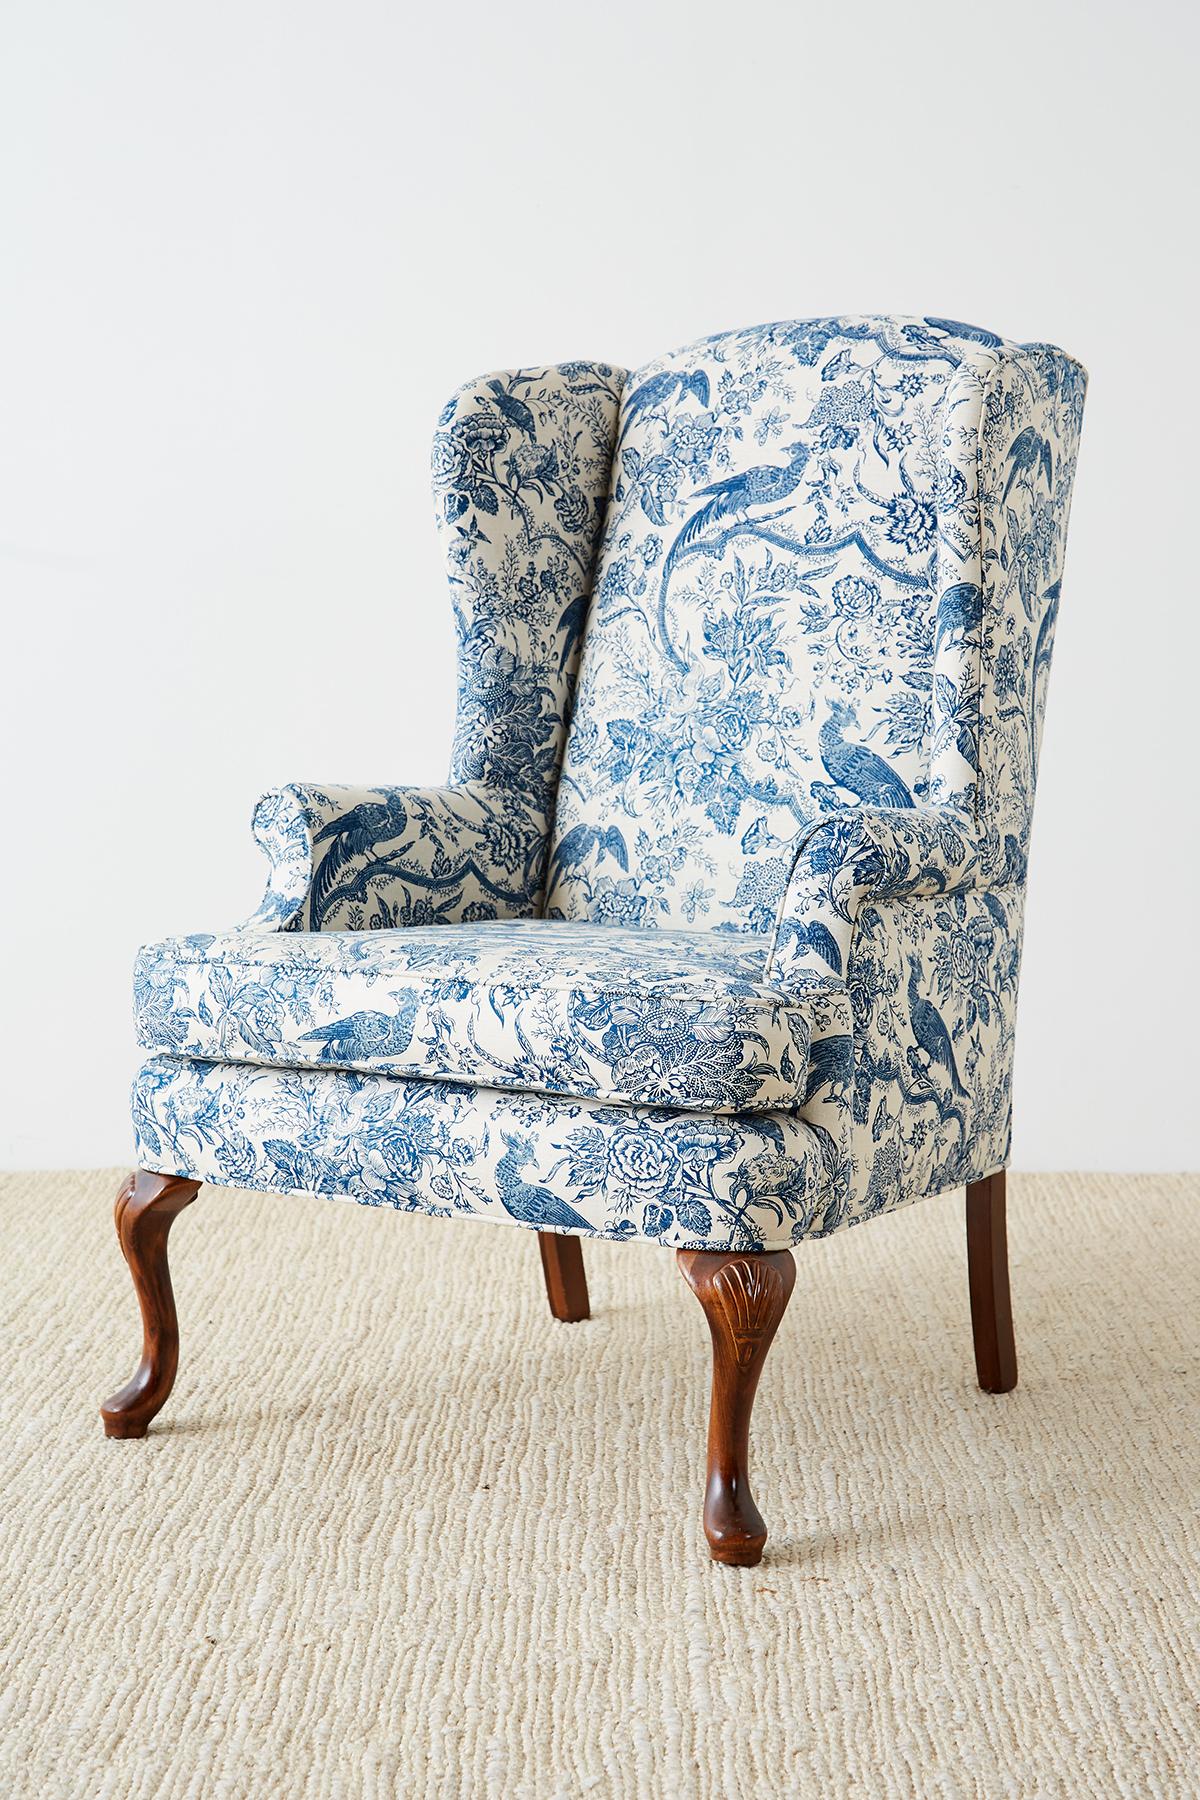 queen anne chair with ottoman